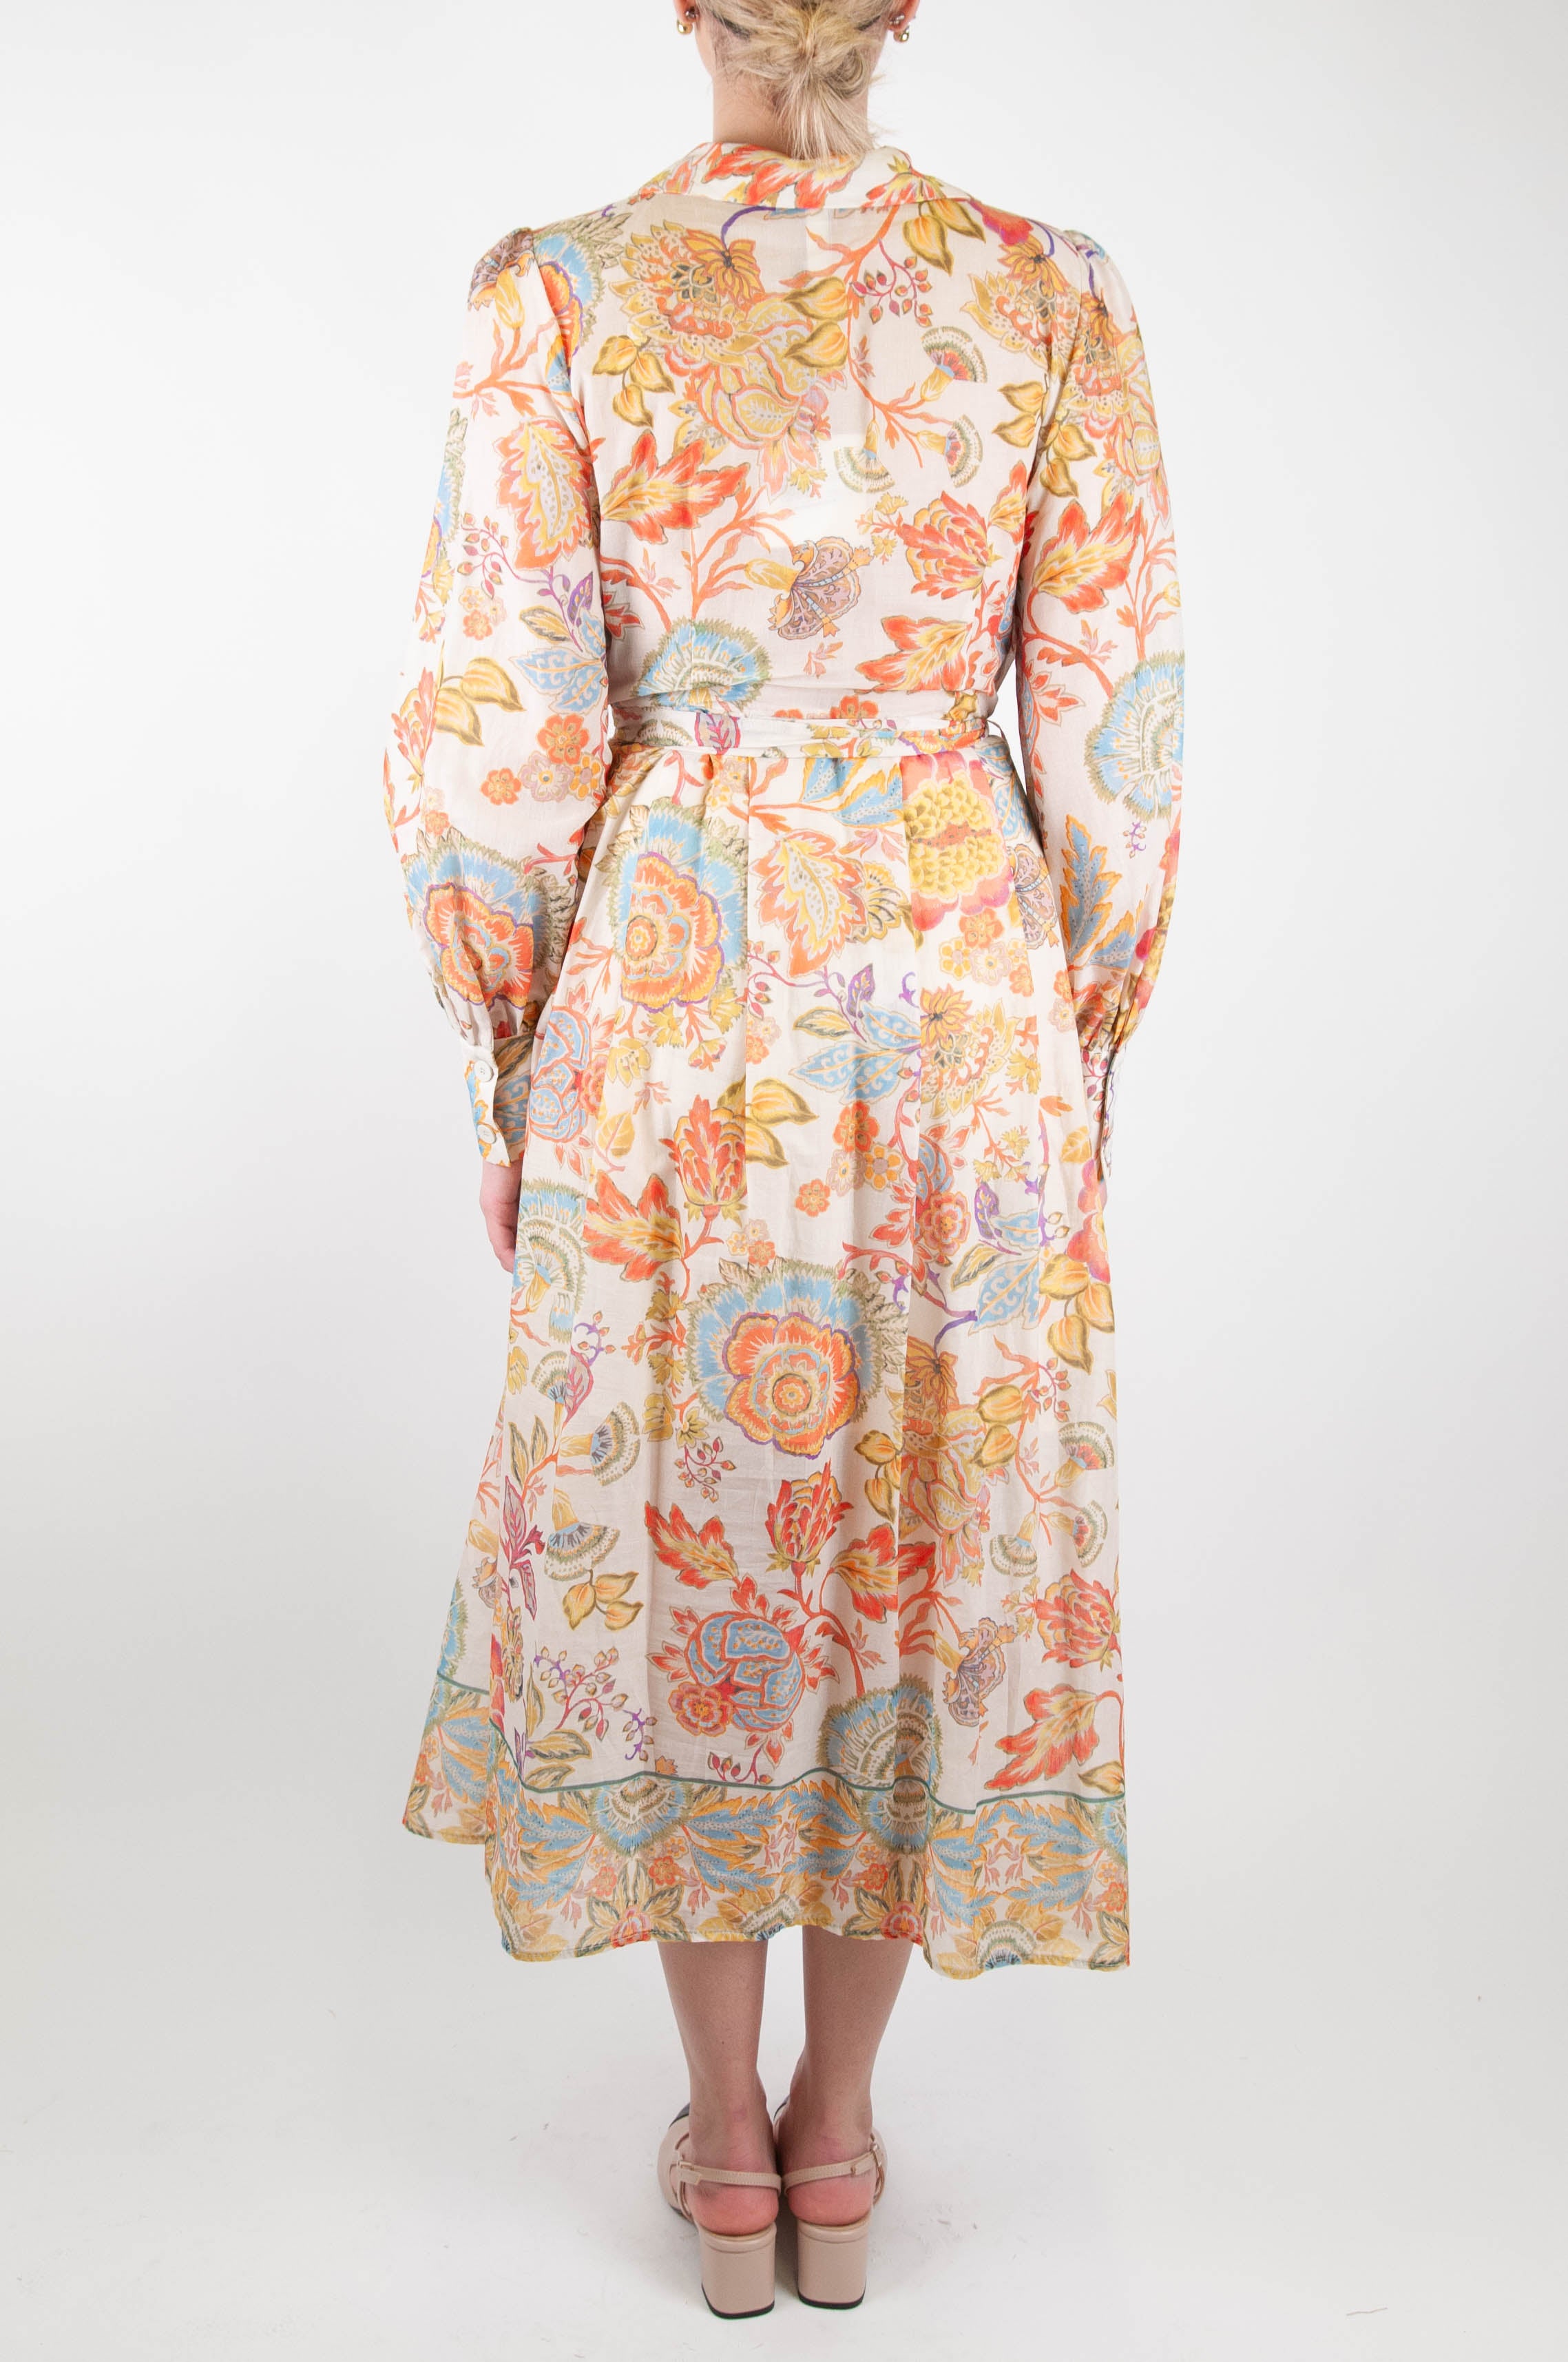 Tension in - Floral patterned shirtdress in cotton muslin with fabric belt